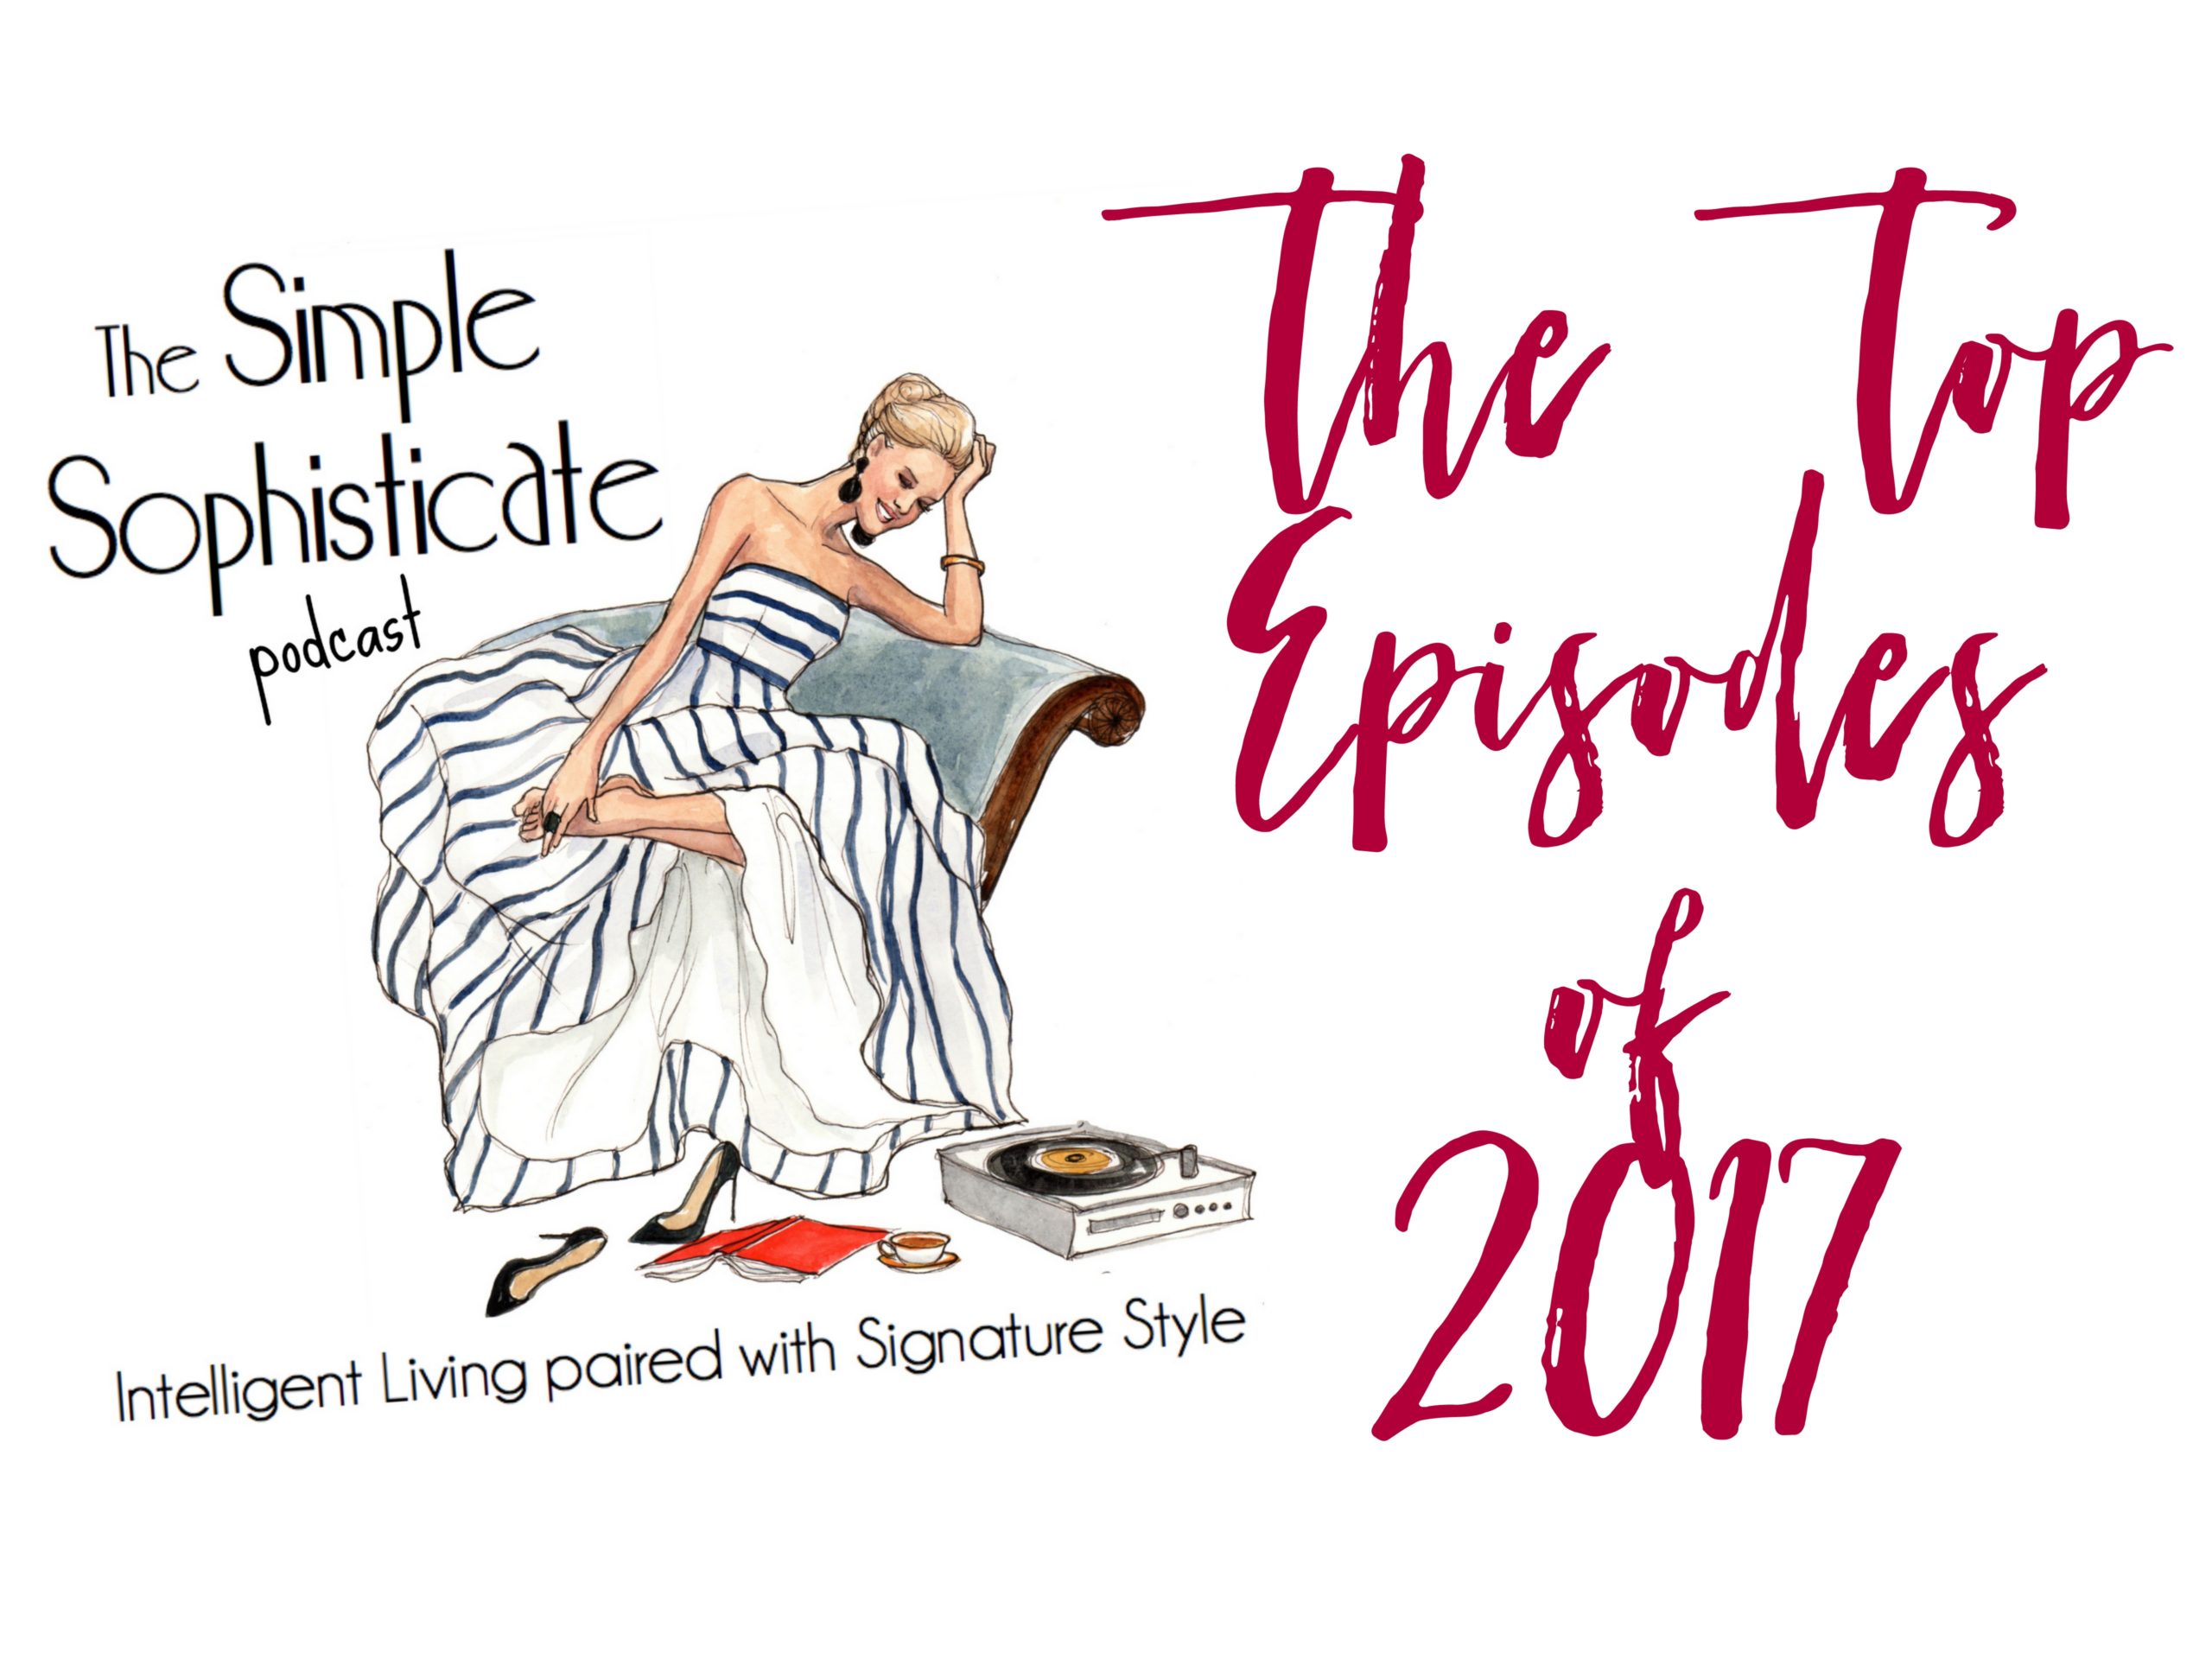 Top Episodes of 2017: The Simple Sophisticate